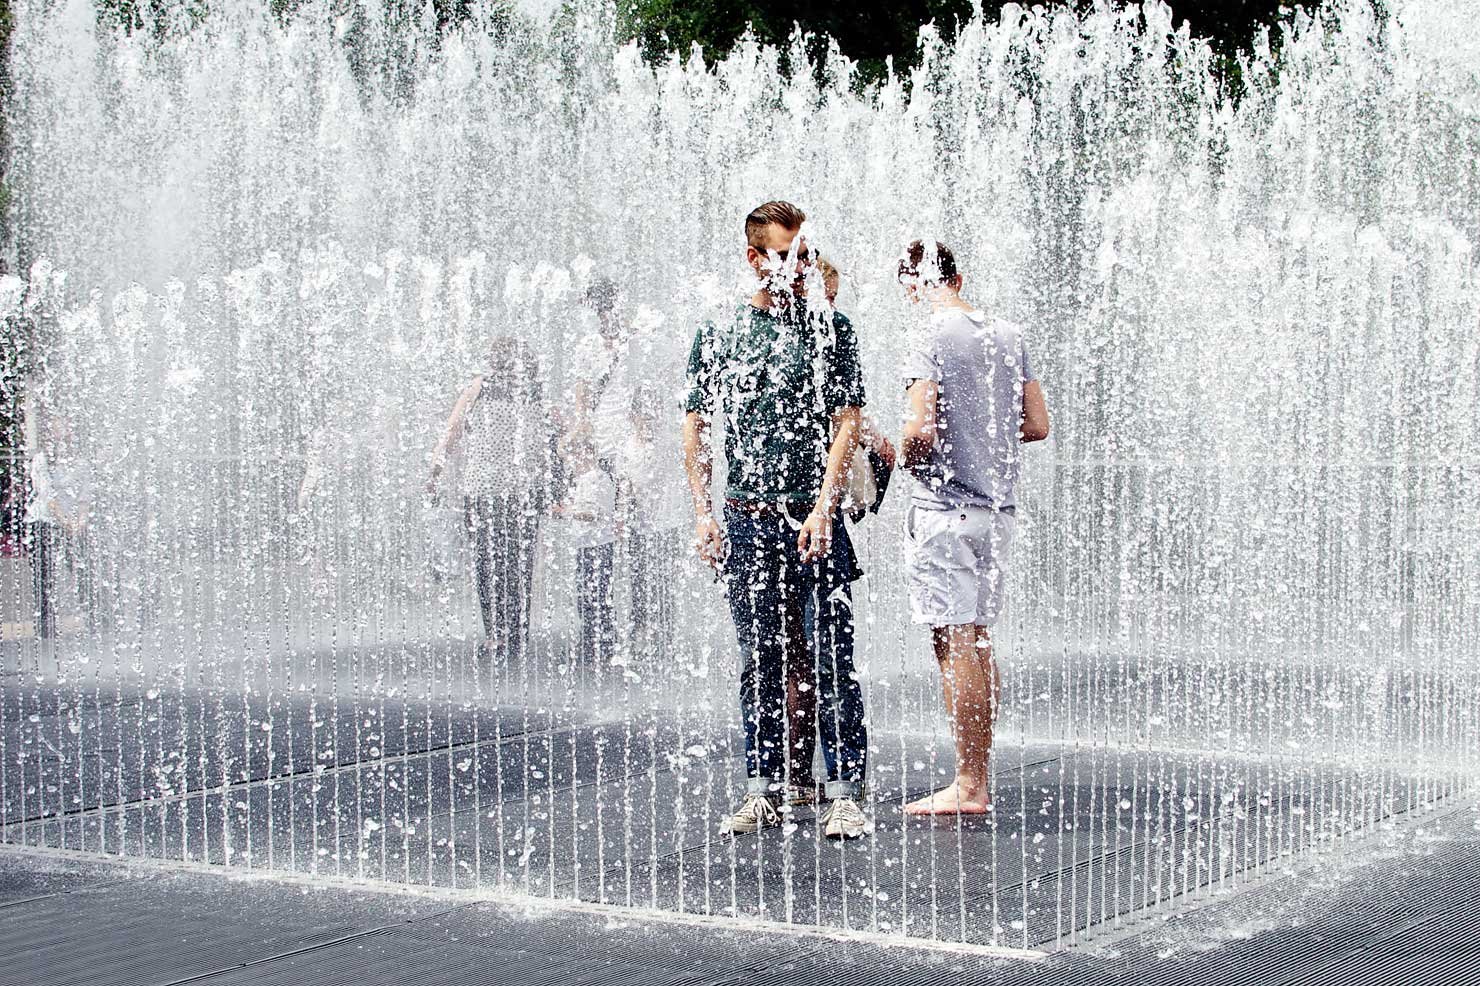 Jeppe Hein’s Appearing Rooms Fountain